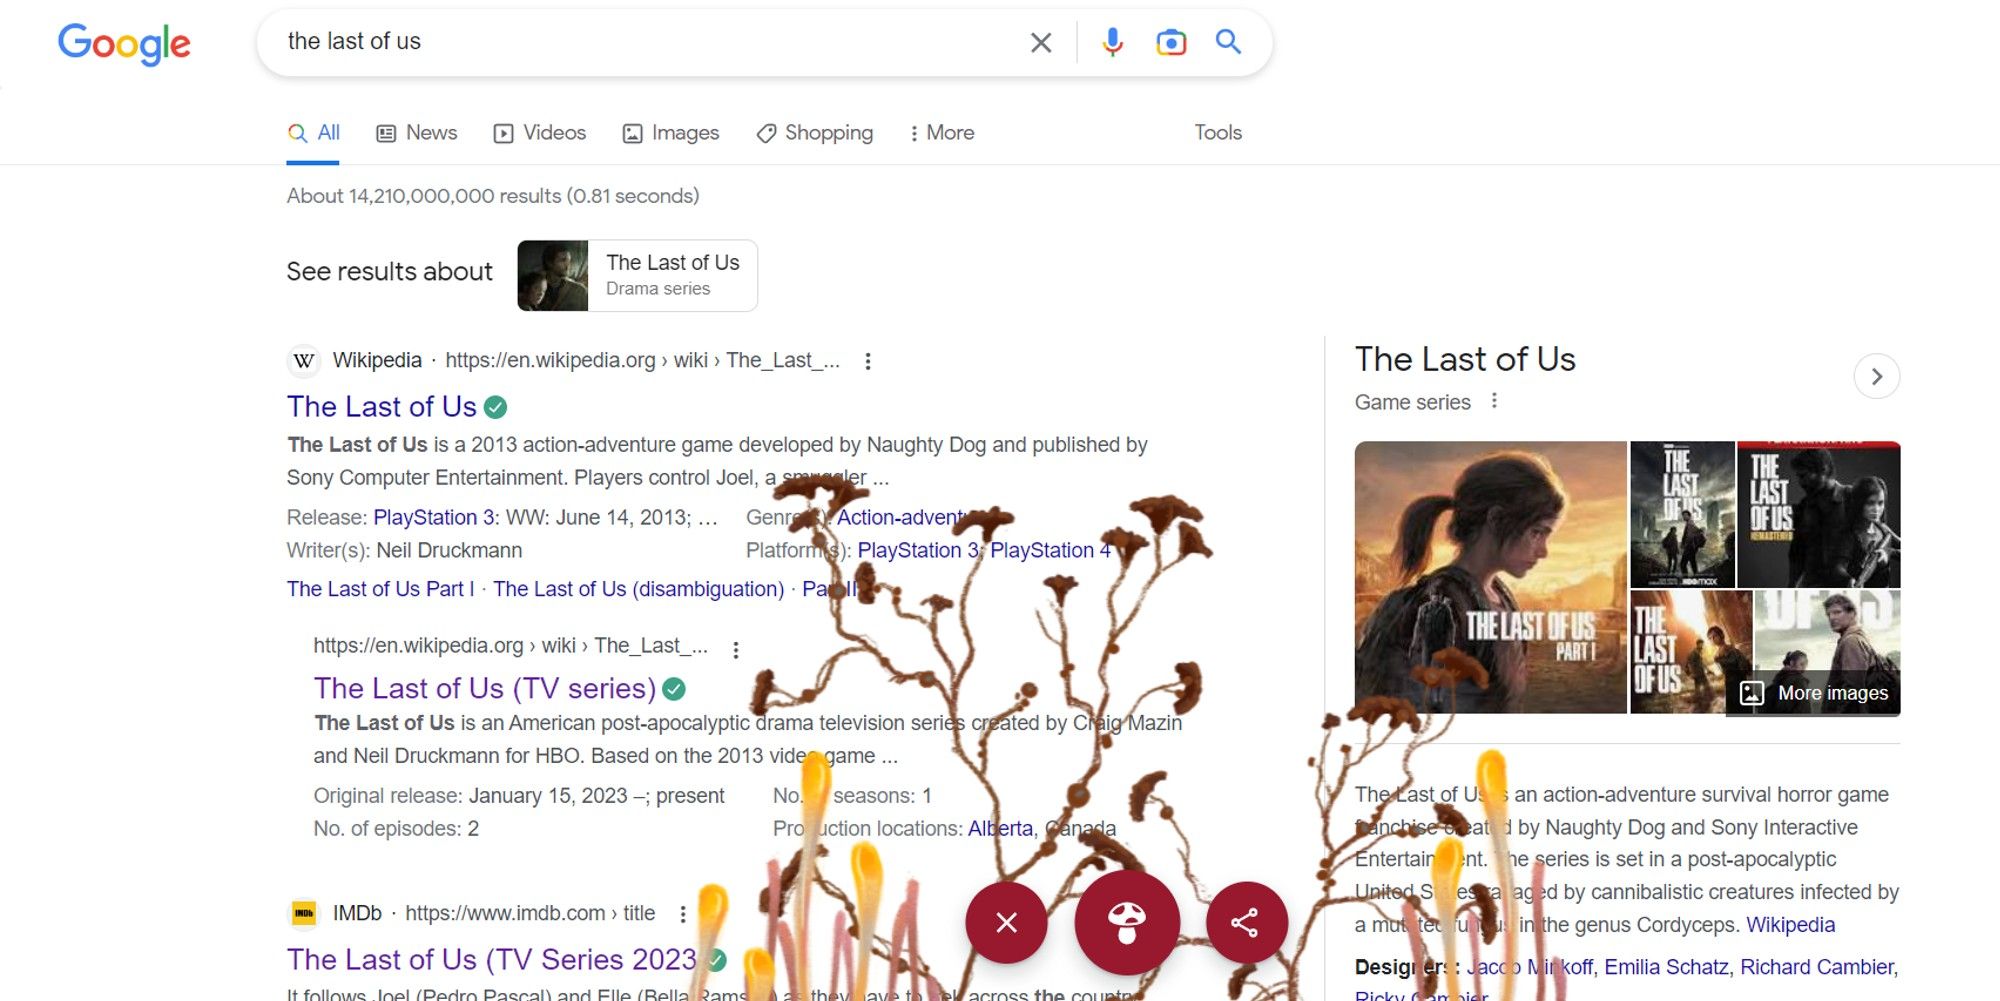 google page infected with the last of us cordyceps fungus